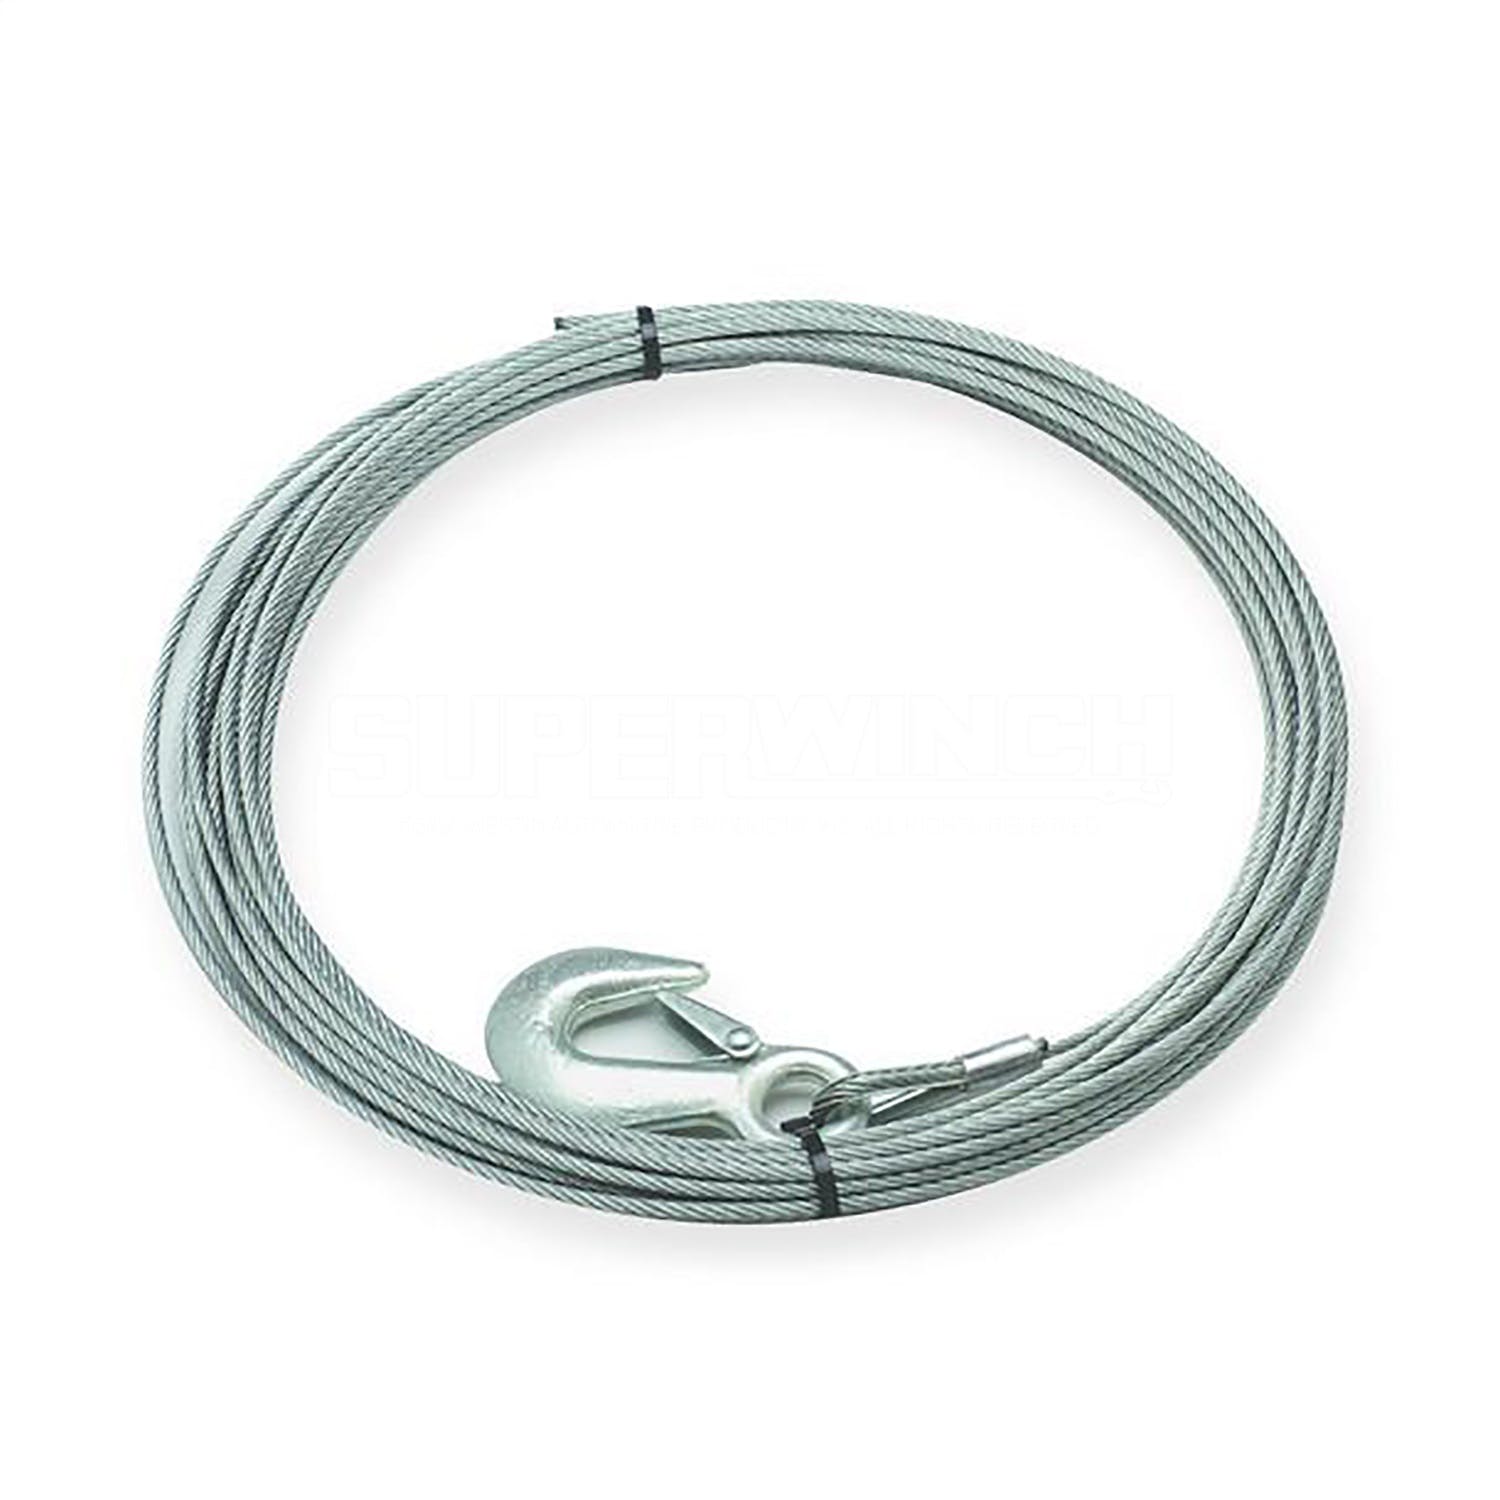 Superwinch 90-24576 Replacement Wire Rope 3/8 diameter x 80 length